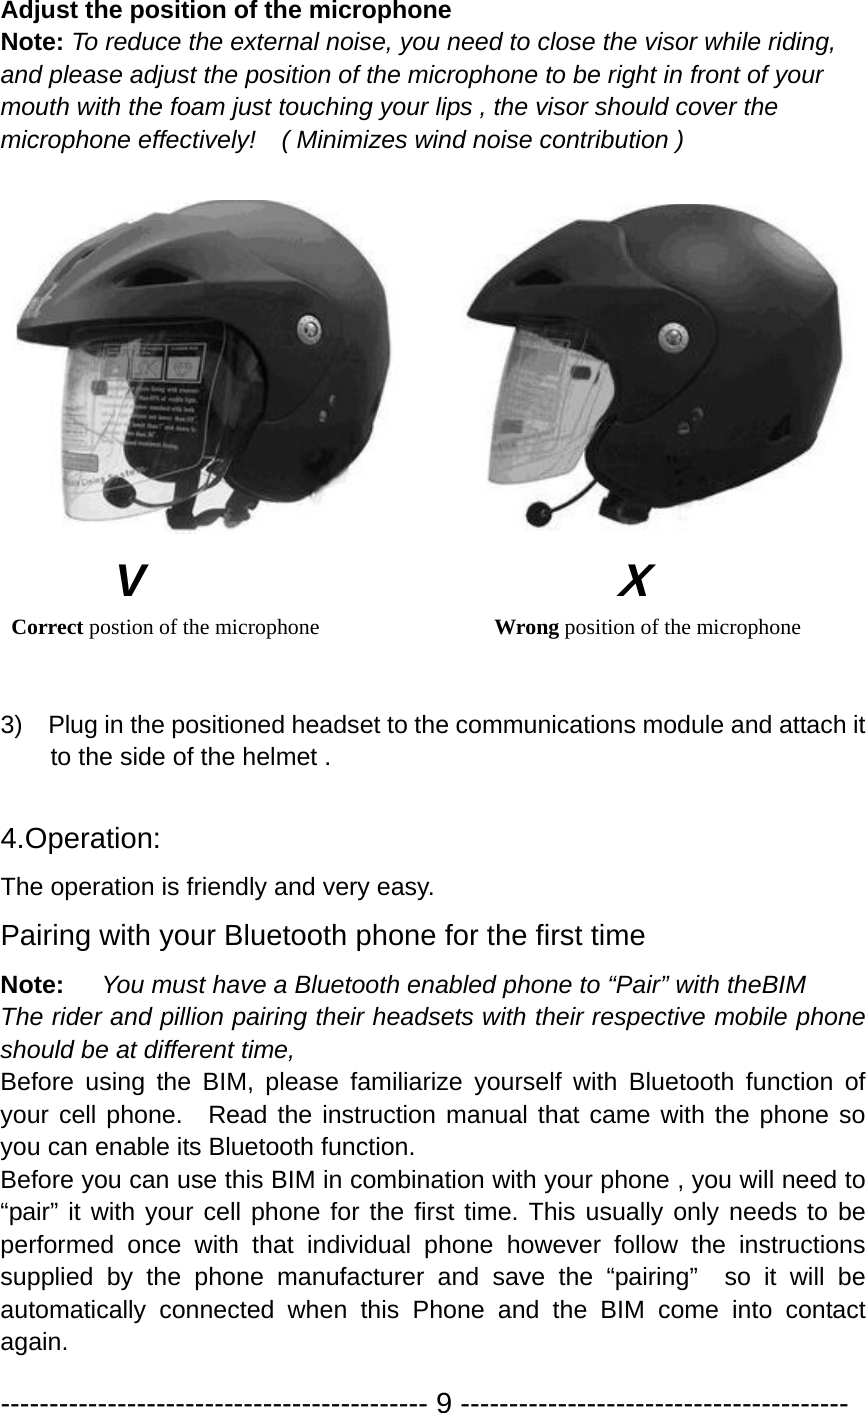 Adjust the position of the microphone Note: To reduce the external noise, you need to close the visor while riding, and please adjust the position of the microphone to be right in front of your mouth with the foam just touching your lips , the visor should cover the microphone effectively!    ( Minimizes wind noise contribution )          V                                     X  Correct postion of the microphone                Wrong position of the microphone   3)    Plug in the positioned headset to the communications module and attach it to the side of the helmet .  4.Operation: The operation is friendly and very easy. Pairing with your Bluetooth phone for the first time Note:   You must have a Bluetooth enabled phone to “Pair” with theBIM  The rider and pillion pairing their headsets with their respective mobile phone should be at different time, Before using the BIM, please familiarize yourself with Bluetooth function of your cell phone.   Read the instruction manual that came with the phone so you can enable its Bluetooth function.   Before you can use this BIM in combination with your phone , you will need to “pair” it with your cell phone for the first time. This usually only needs to be performed once with that individual phone however follow the instructions supplied by the phone manufacturer and save the “pairing”  so it will be automatically connected when this Phone and the BIM come into contact again.  -------------------------------------------- 9 ---------------------------------------- 